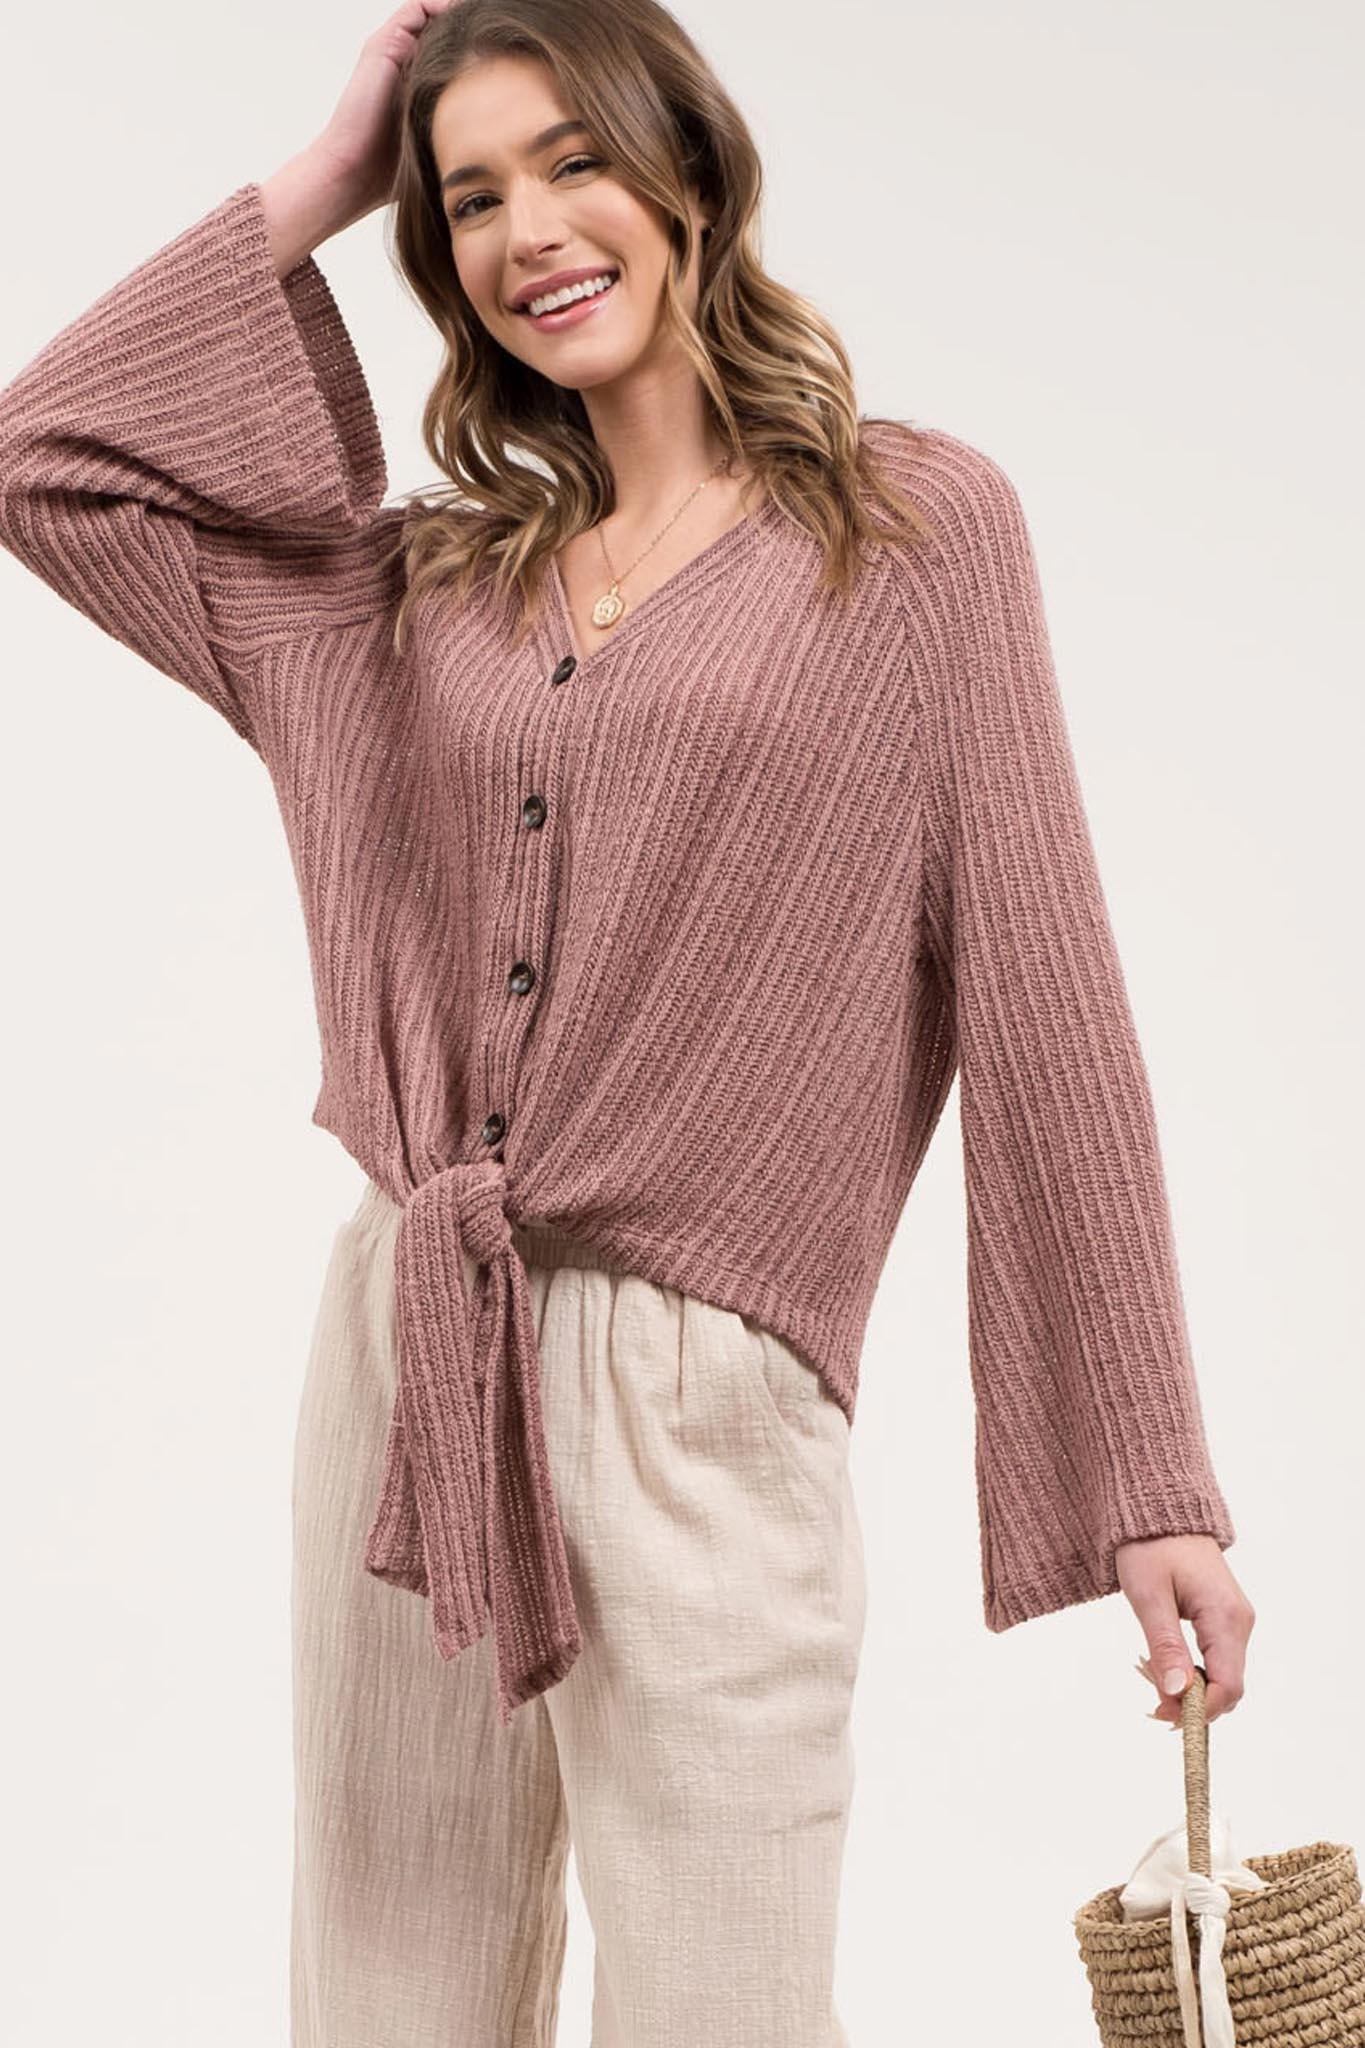 Jordan Button Up Knit Top - Corinne an Affordable Women's Clothing Boutique in the US USA